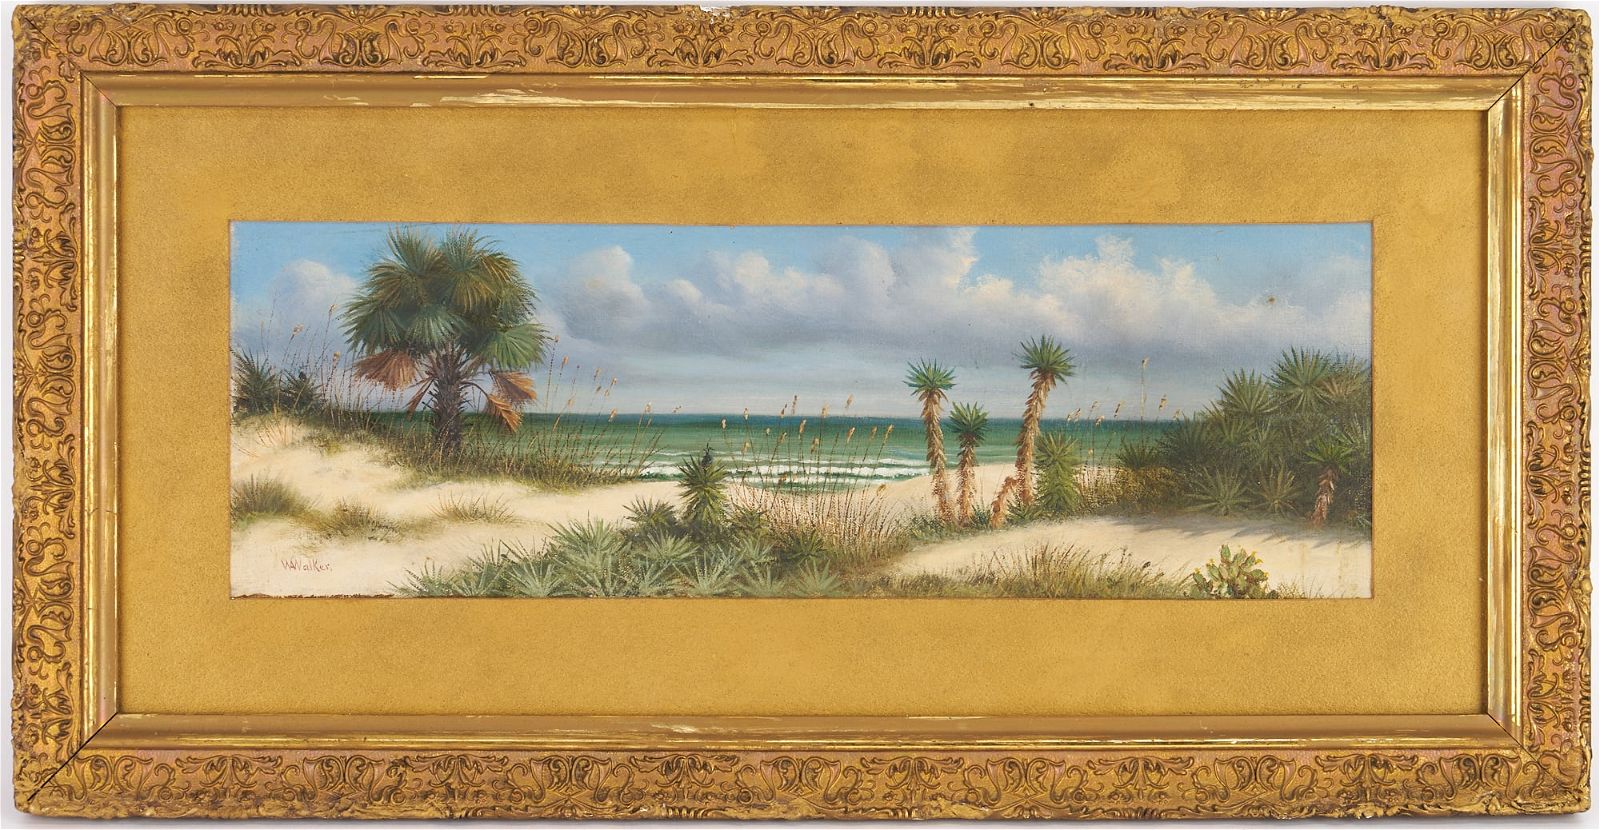 William Walker oil-on-linen seascape, which sold for $39,000 with buyer’s premium at Case.